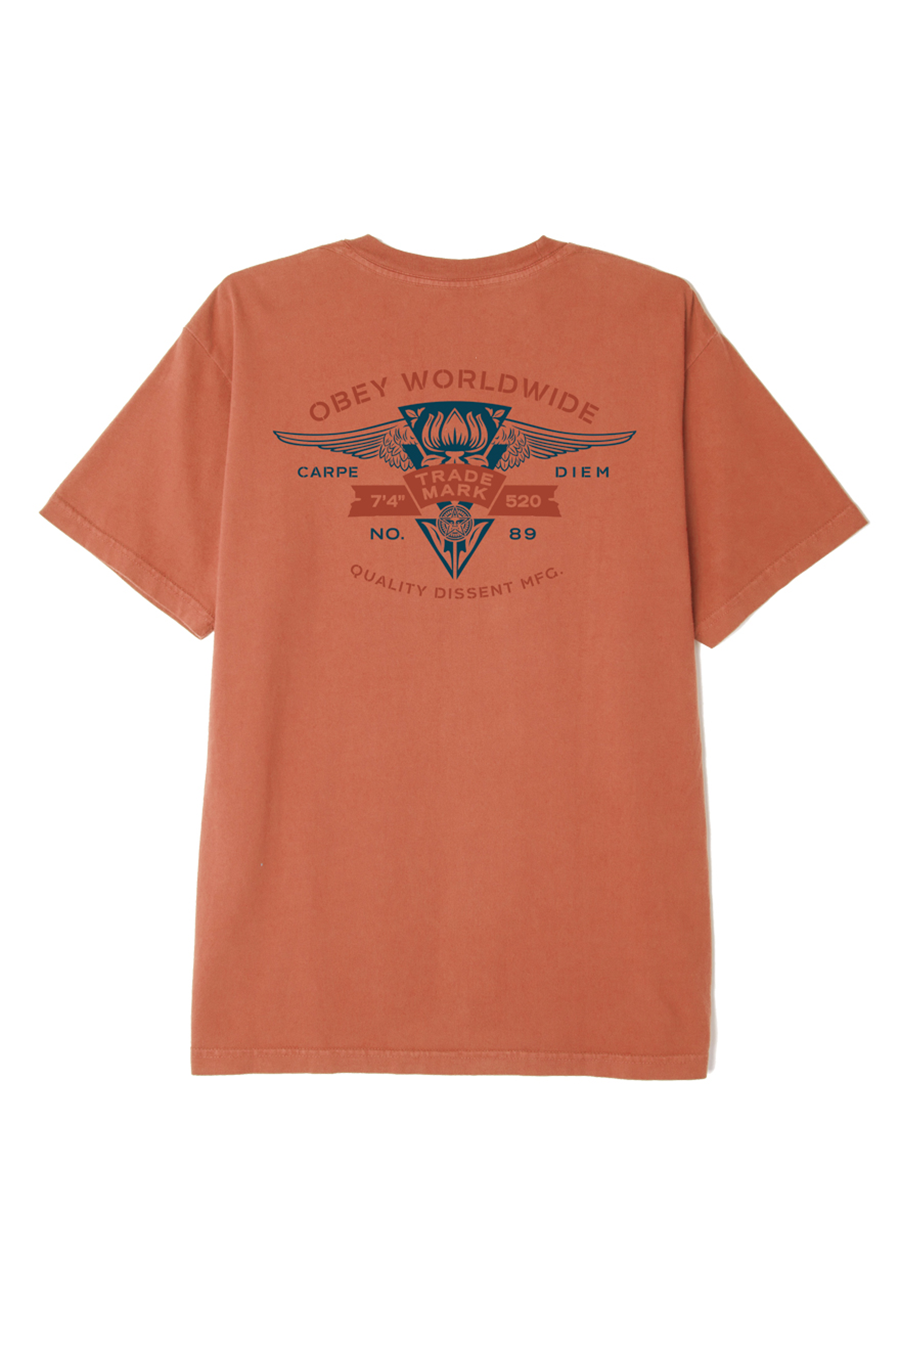 Winged Lotus Organic Tee | Copper Coin - Main Image Number 1 of 2